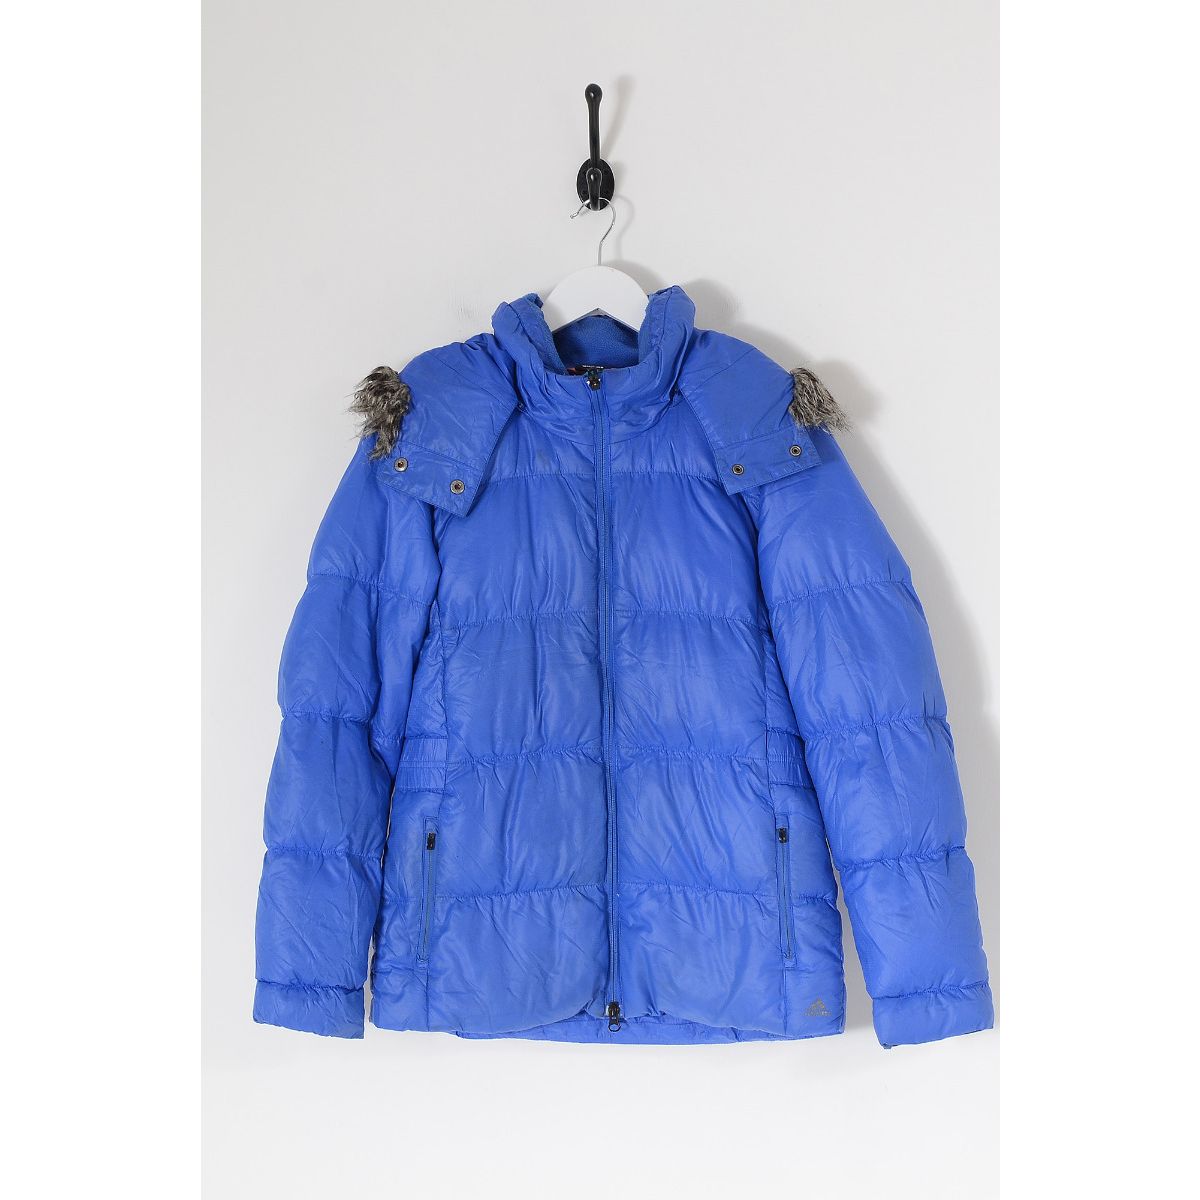 Vintage ADIDAS Puffer Coat Blue Small